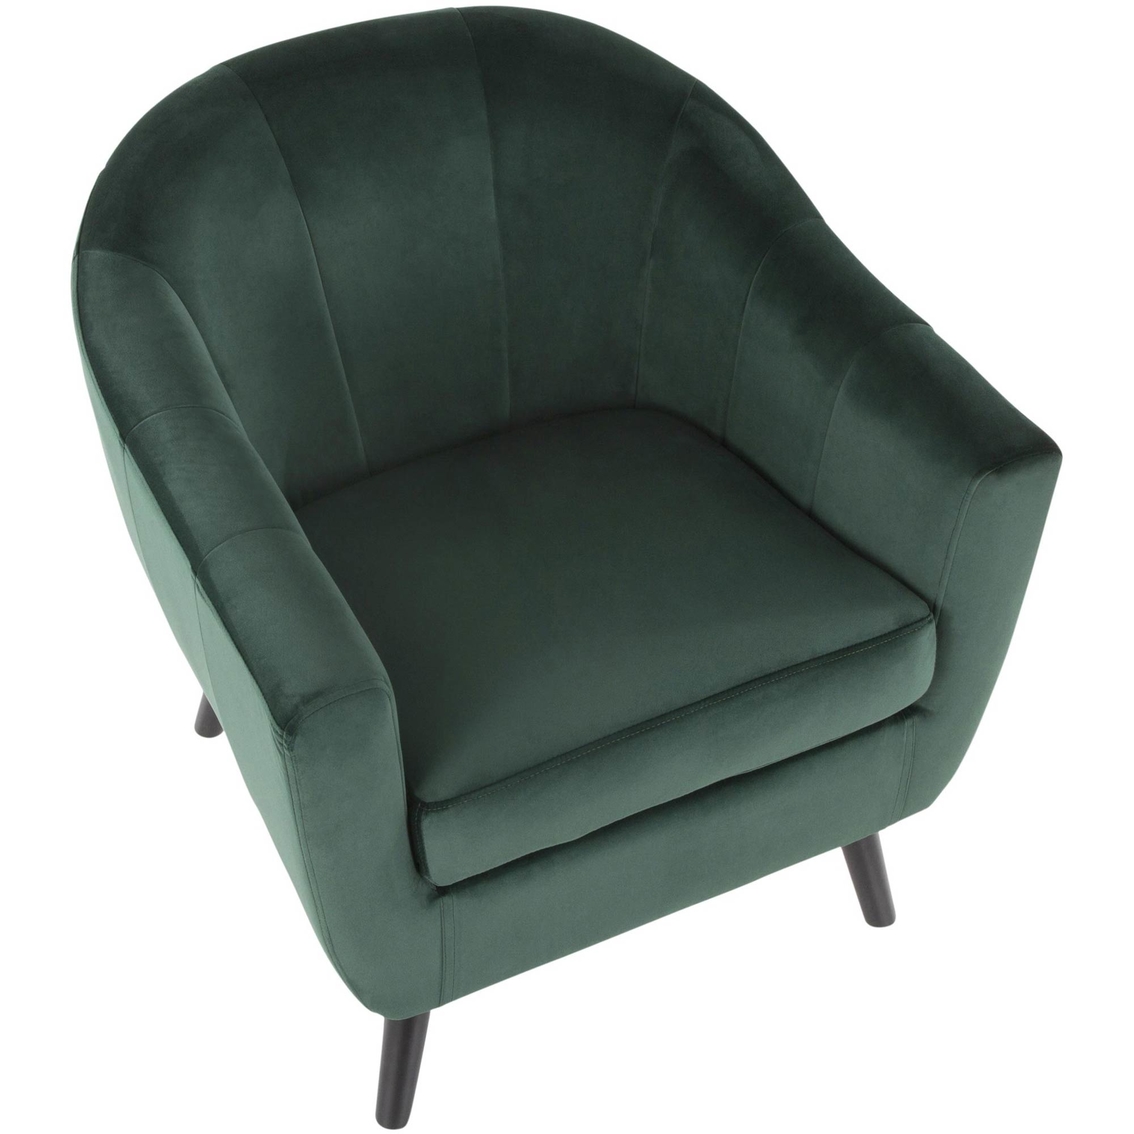 LumiSource Rockwell Accent Chair - Image 5 of 5